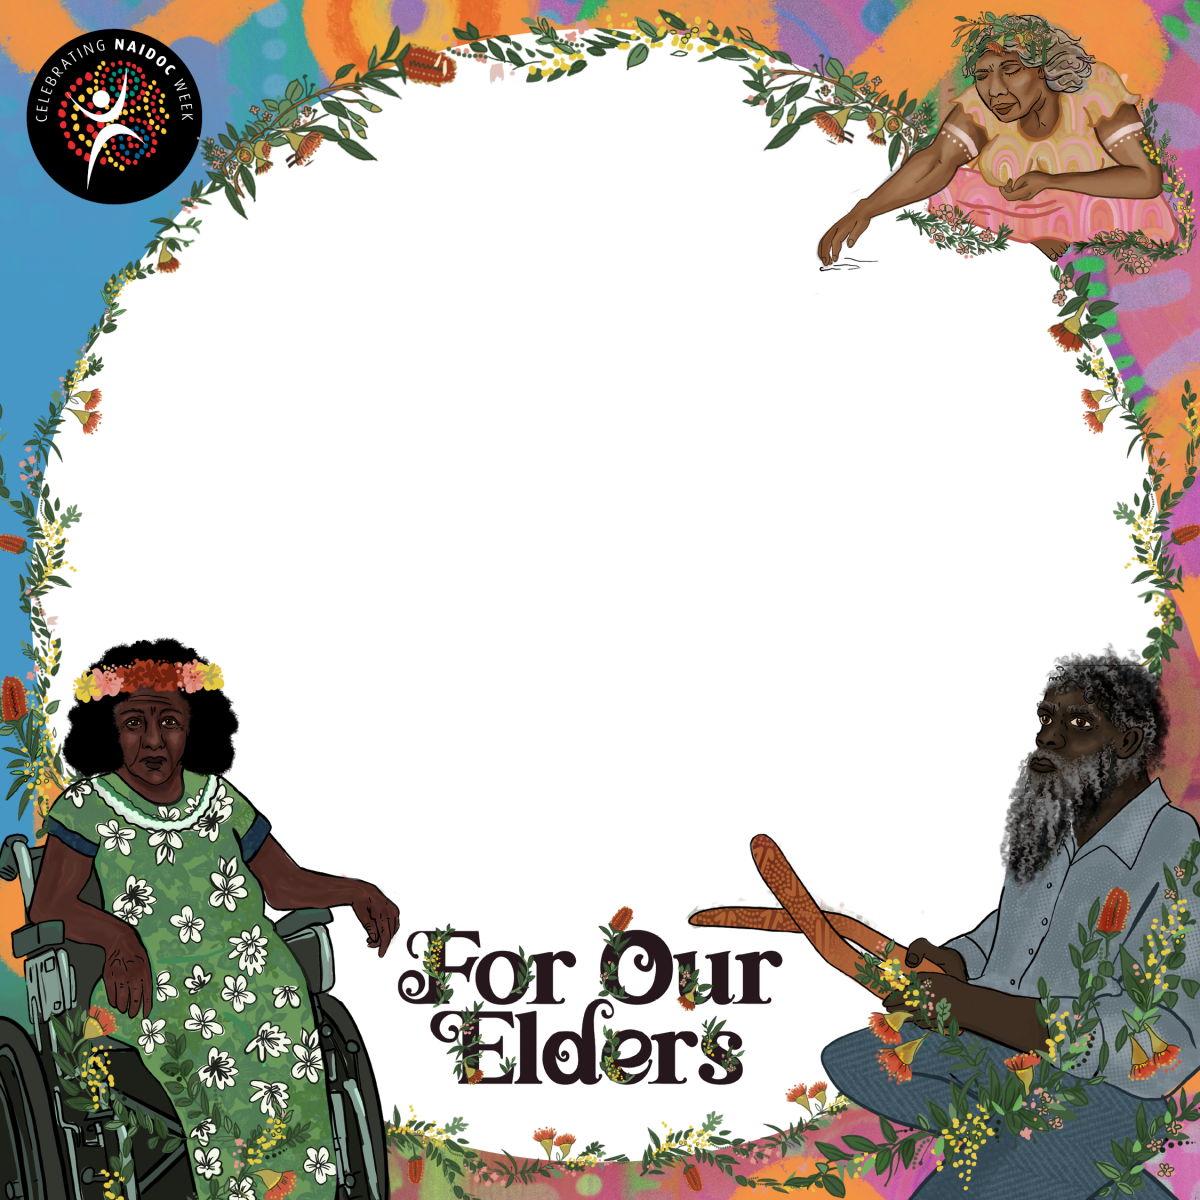 For Our Elders